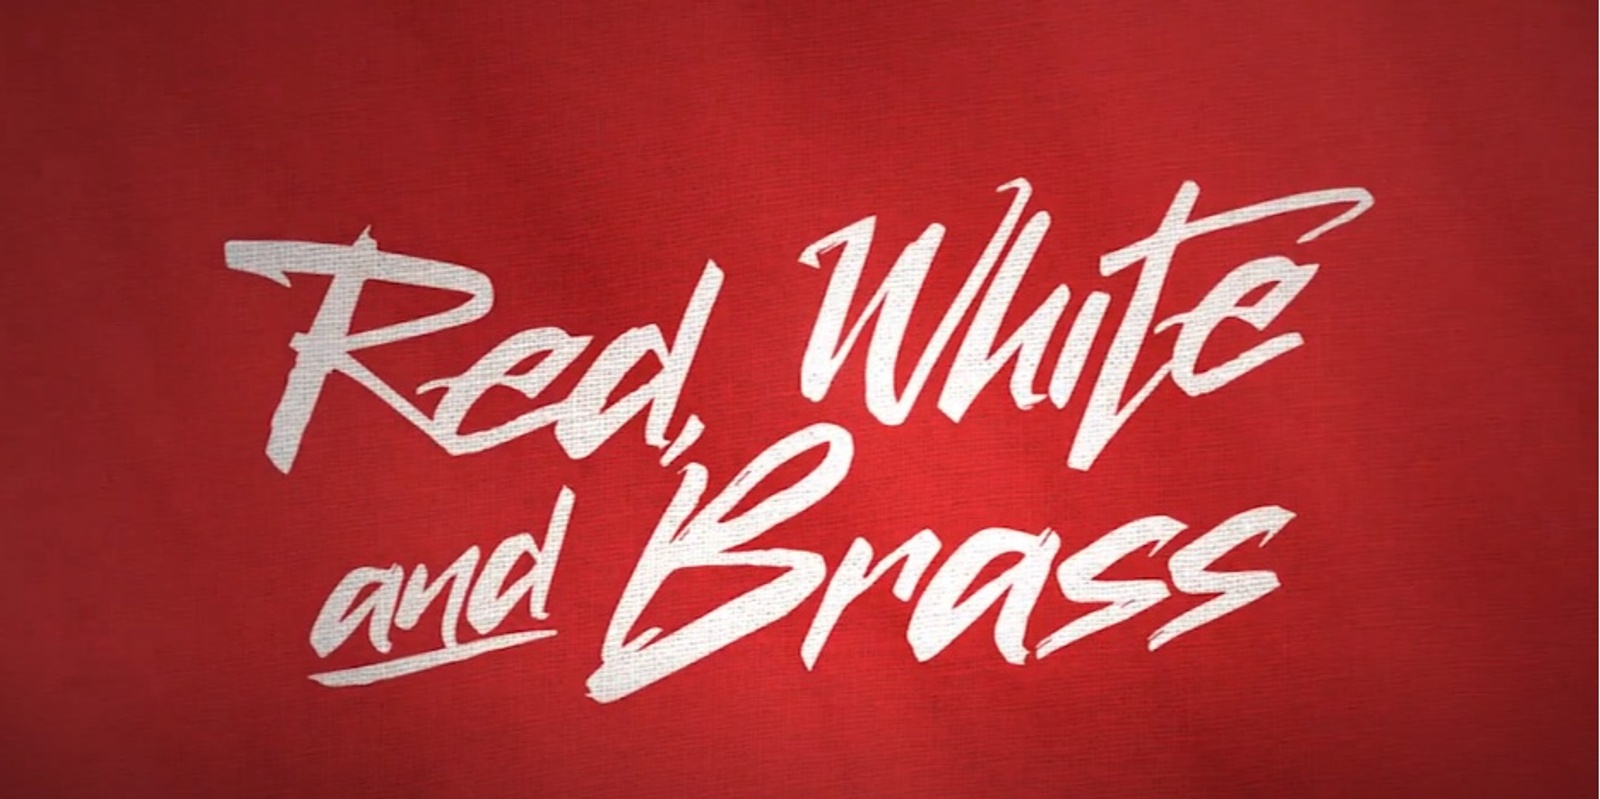 WC Pasifika Parents' Support Group Film Fundraiser - Red, White and Brass